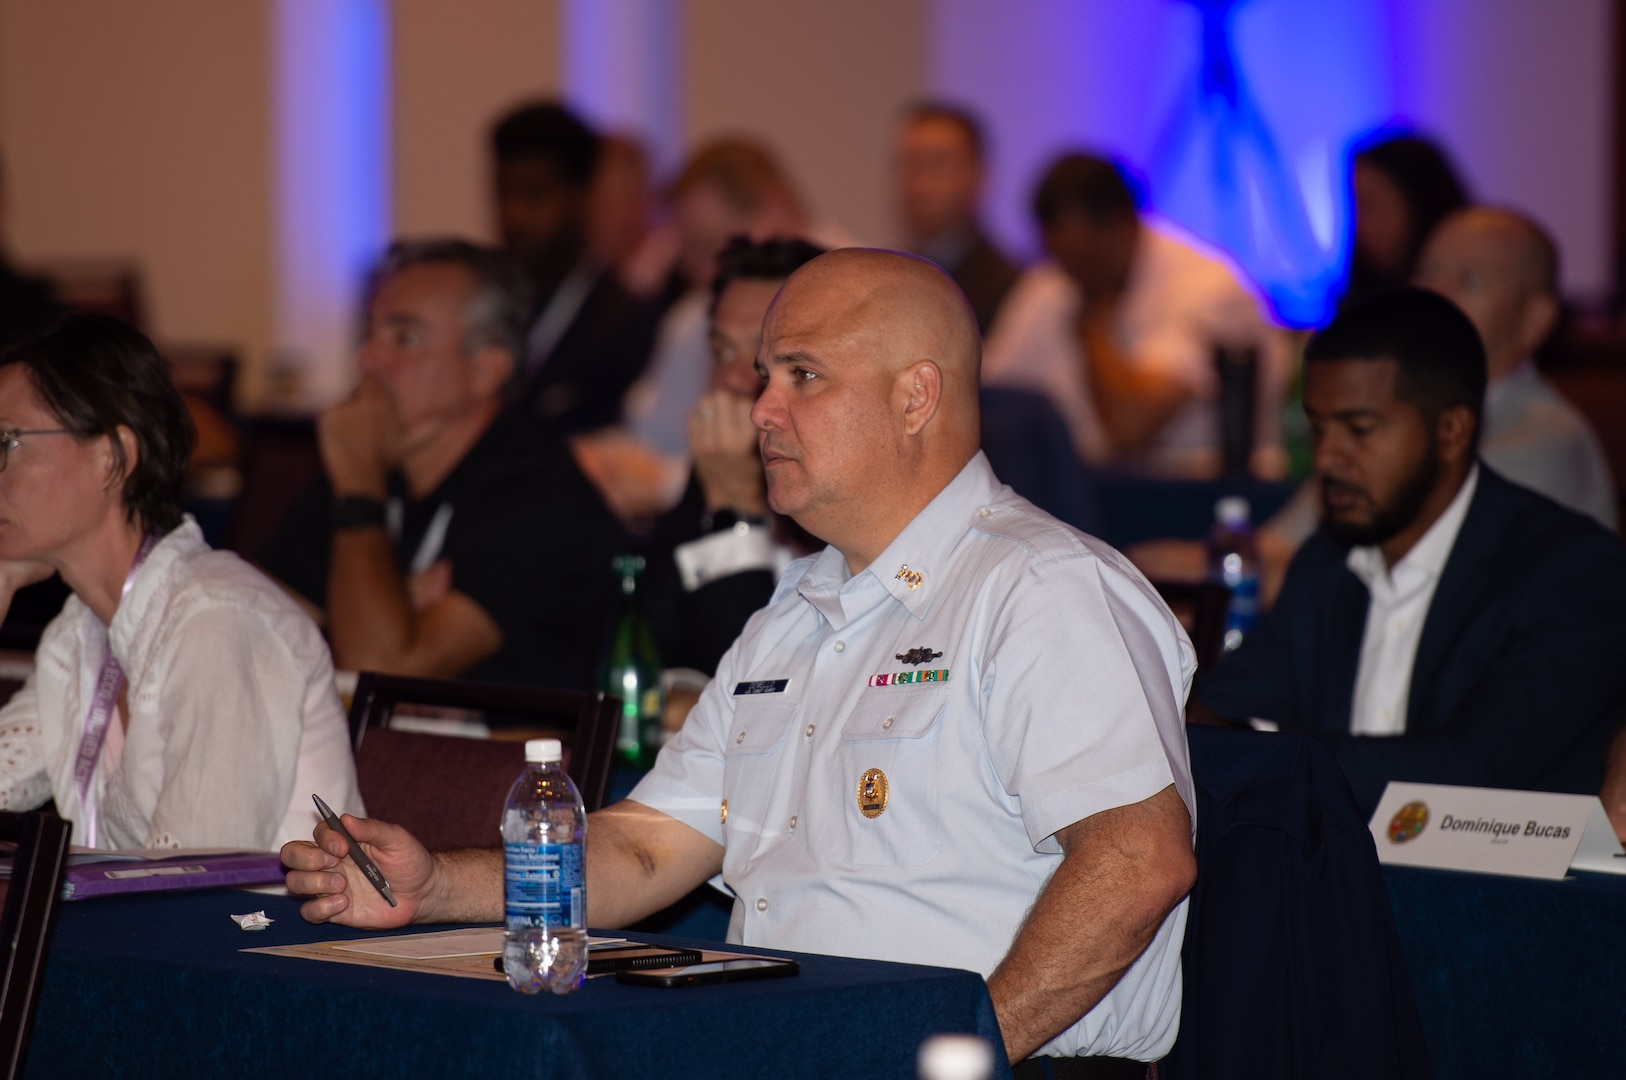 The U.S. Coast Guard Atlantic Area Command Master Chief Jeremy DeMello attends the Eastern Caribbean Combined Coordination Group (ECCG) meeting April 23-25, in San Juan, Puerto Rico. The ECCG is comprised of U.S. interagency and international partners with diverse expertise and authorities necessary to deepen cooperation across myriad jurisdictions and against a broad spectrum of threats and challenges in Eastern Caribbean region